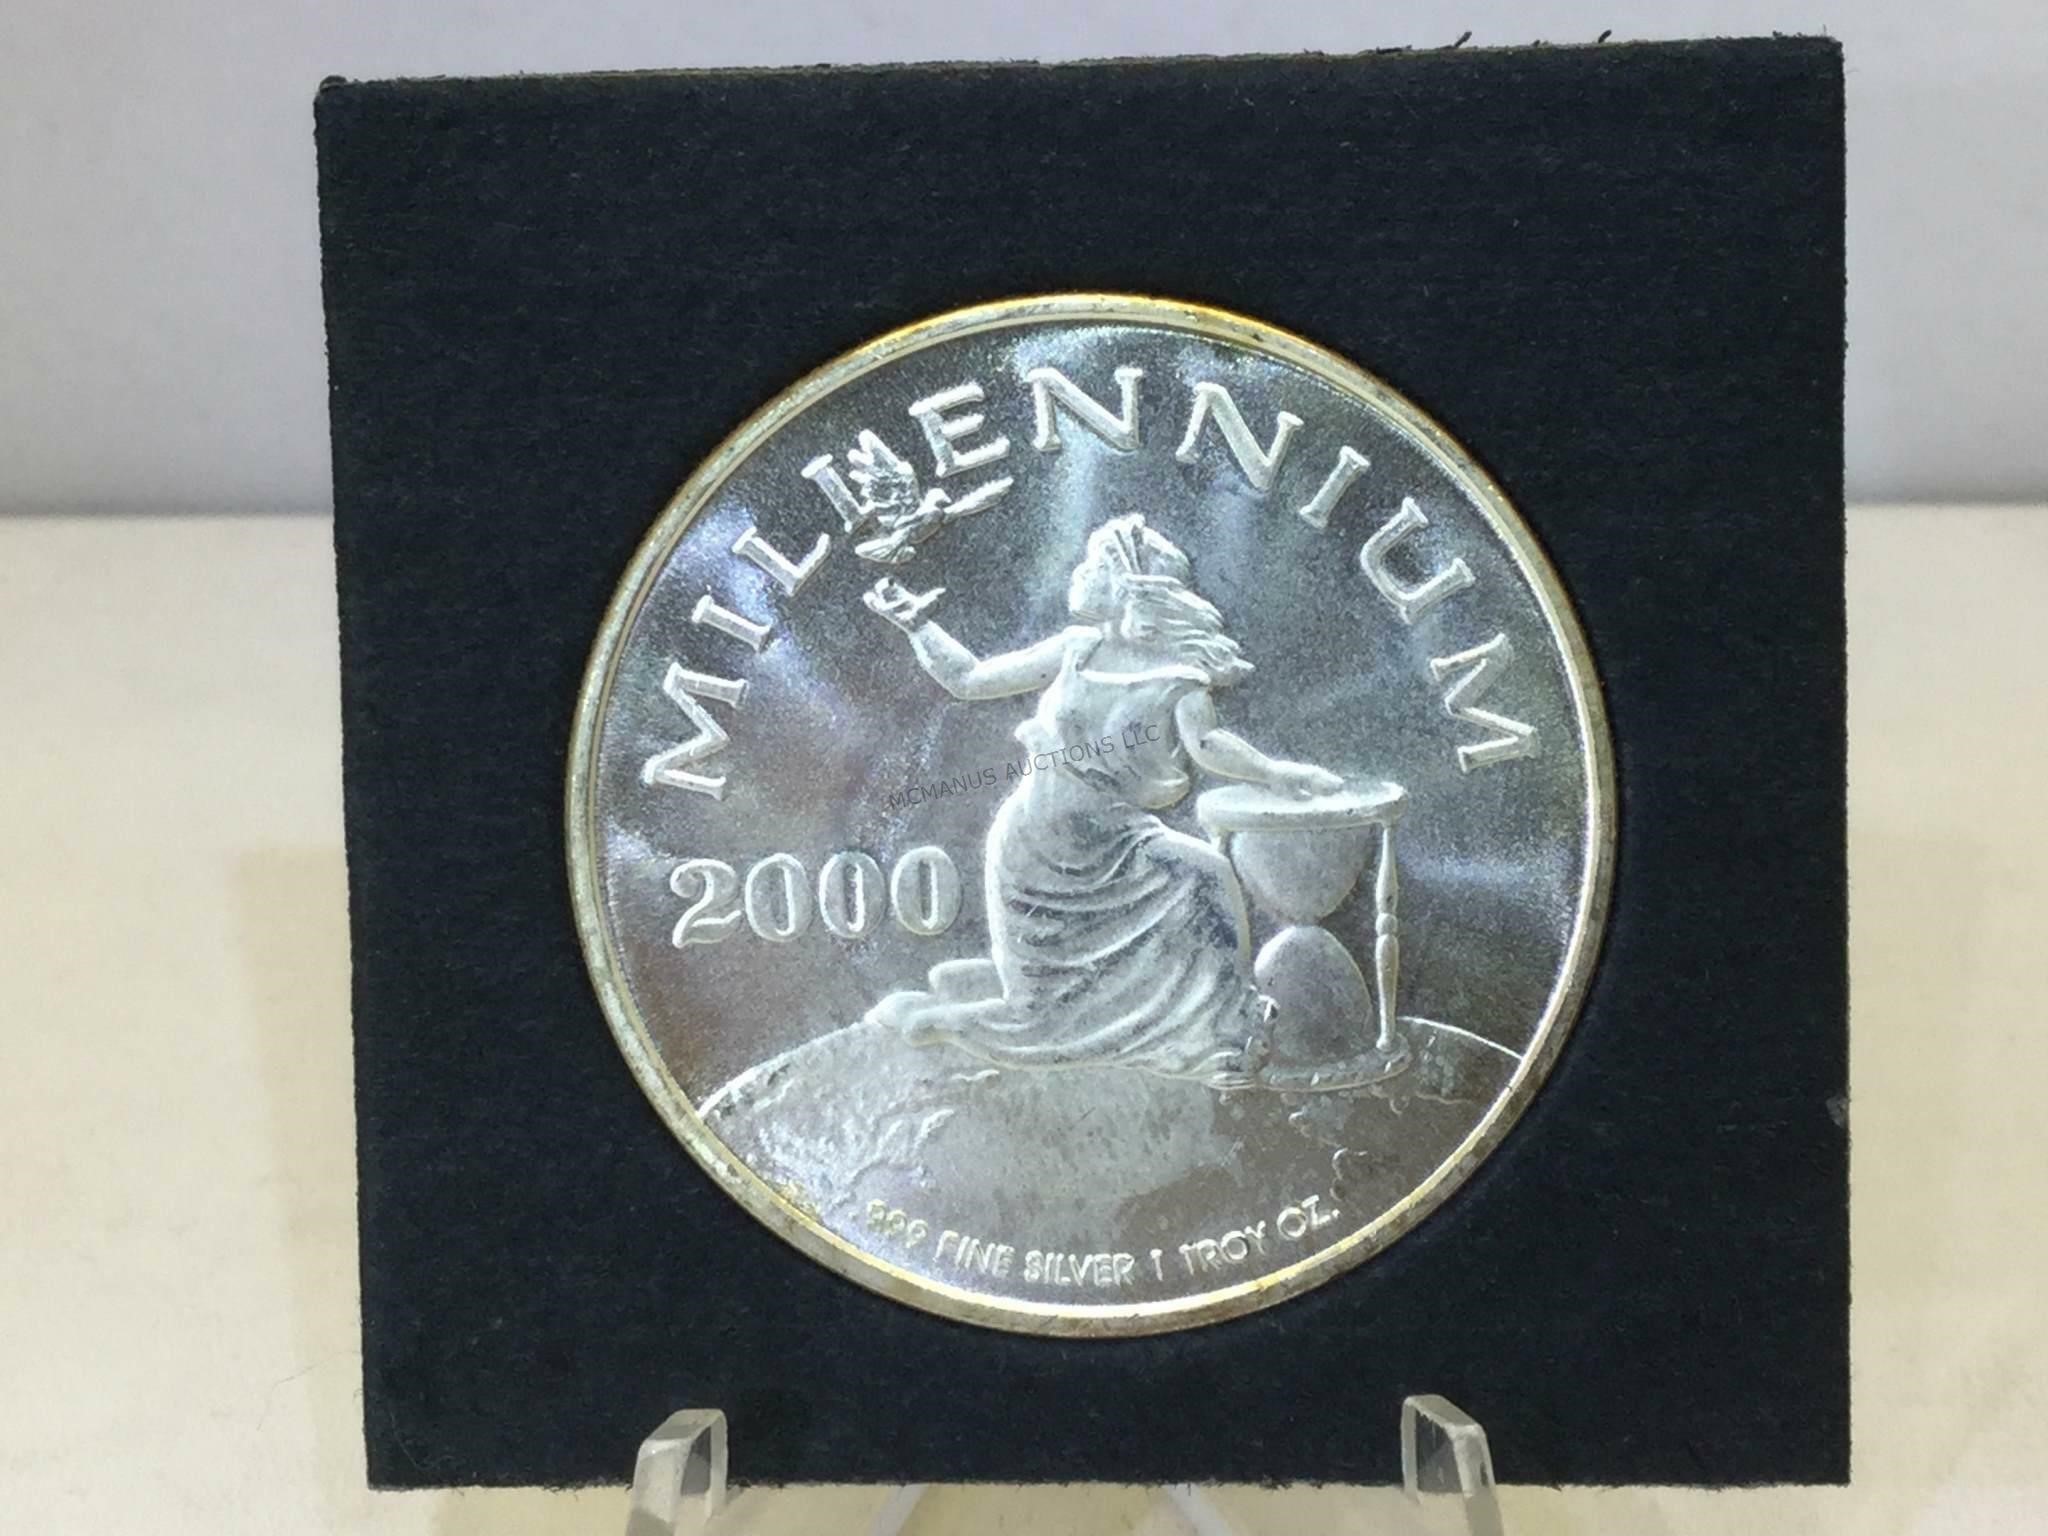 3/7/21 Sports - Coins - Jewelry - Collectibles - More